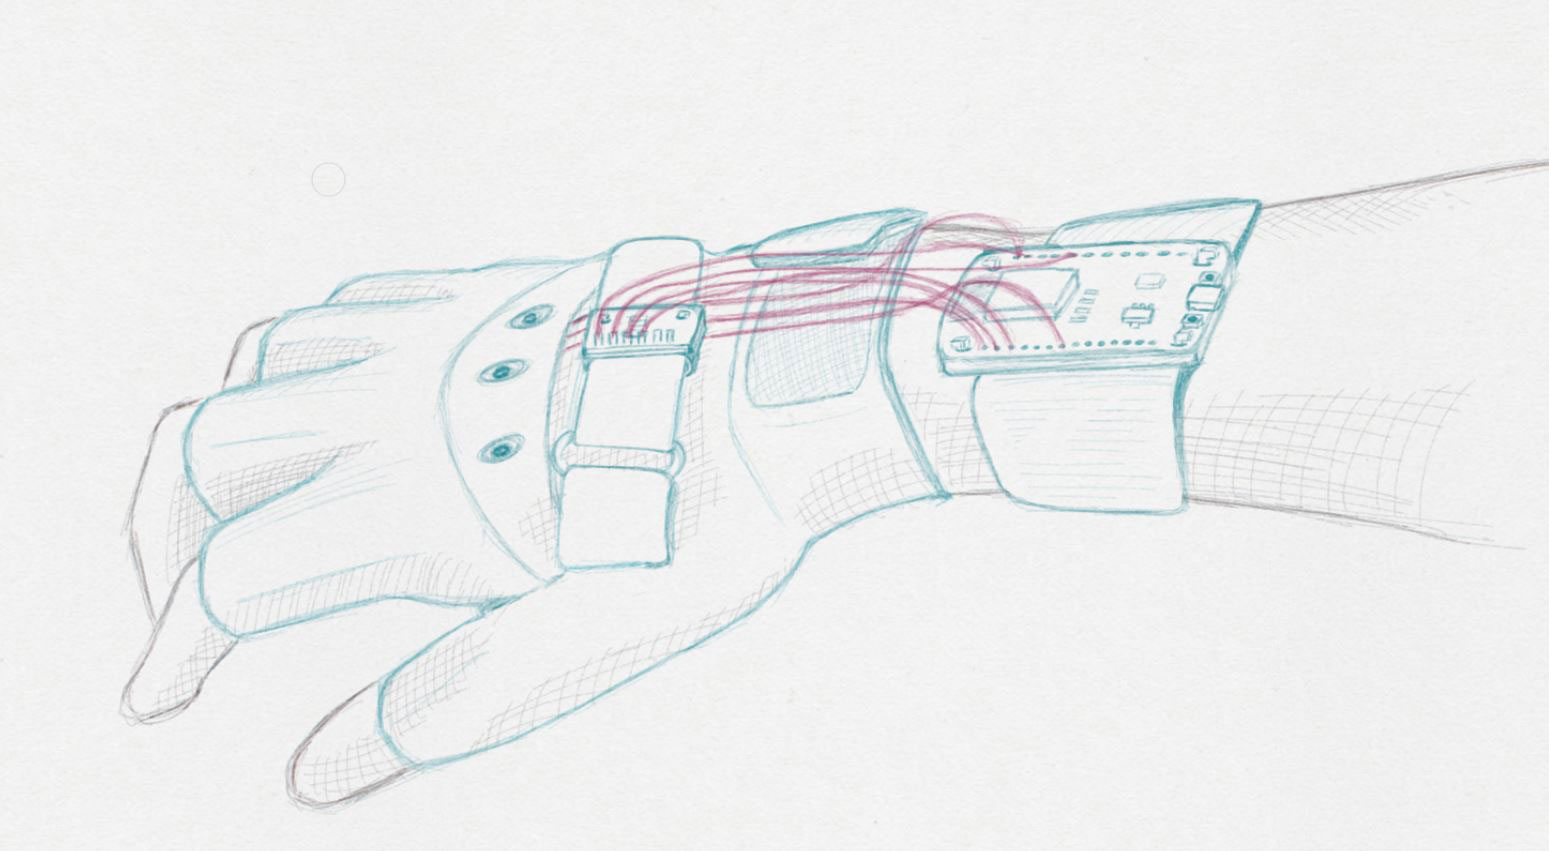 Prototype of a gesture-control glove for electric longboards invented by Florida Polytechnic University students. The team has earned thousands of dollars in funding to further develop the product.